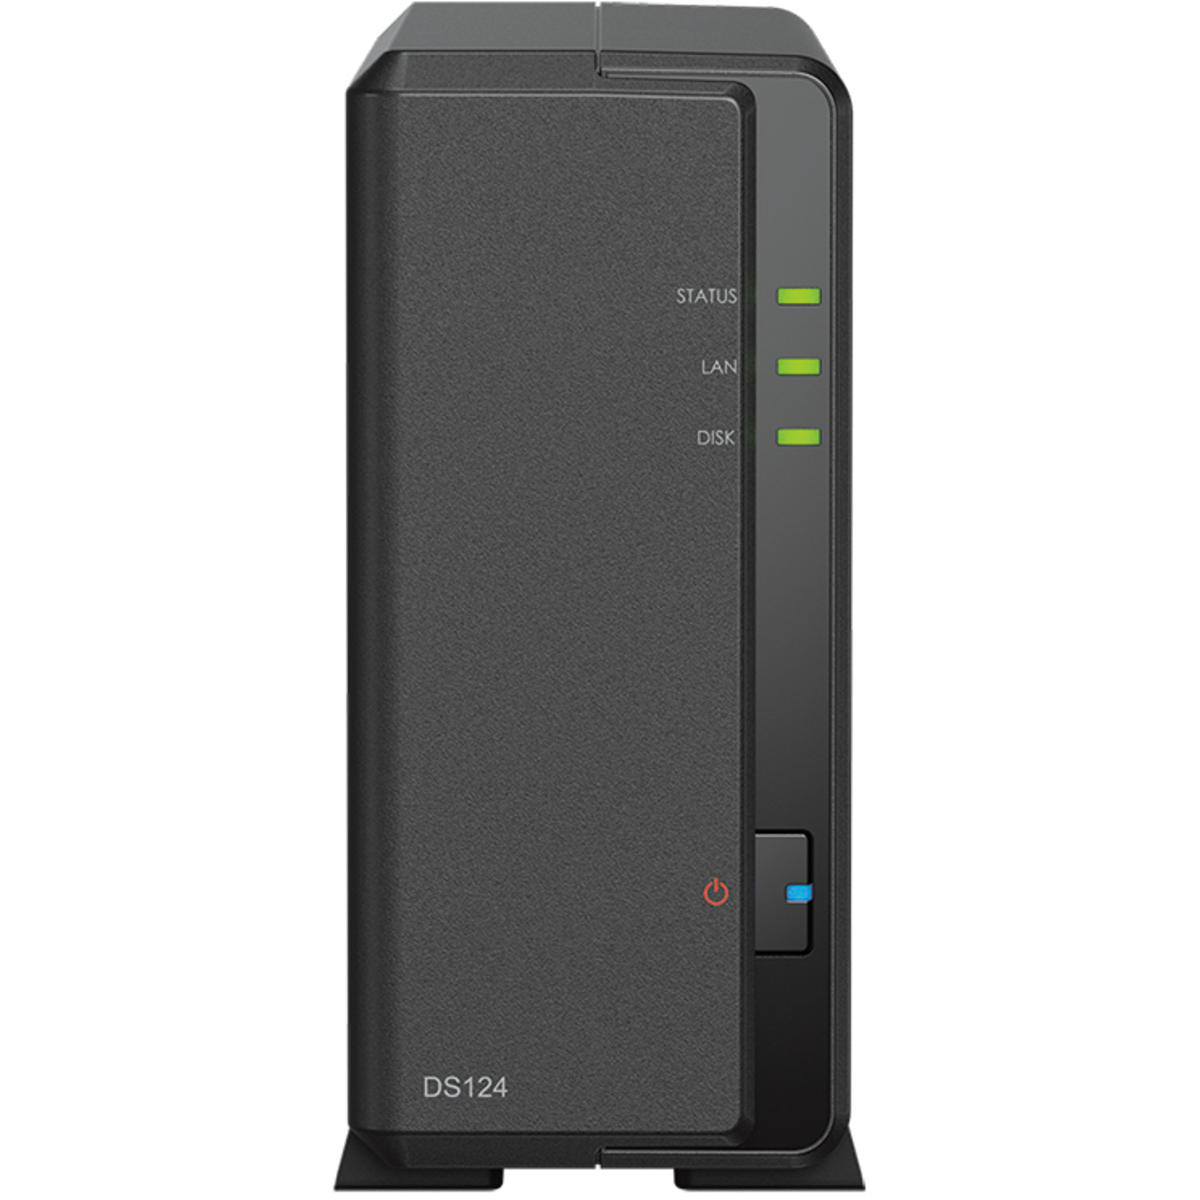 Synology DiskStation DS124 16tb 1-Bay Desktop Personal / Basic Home / Small Office NAS - Network Attached Storage Device 1x16tb Western Digital Red Pro WD161KFGX 3.5 7200rpm SATA 6Gb/s HDD NAS Class Drives Installed - Burn-In Tested DiskStation DS124